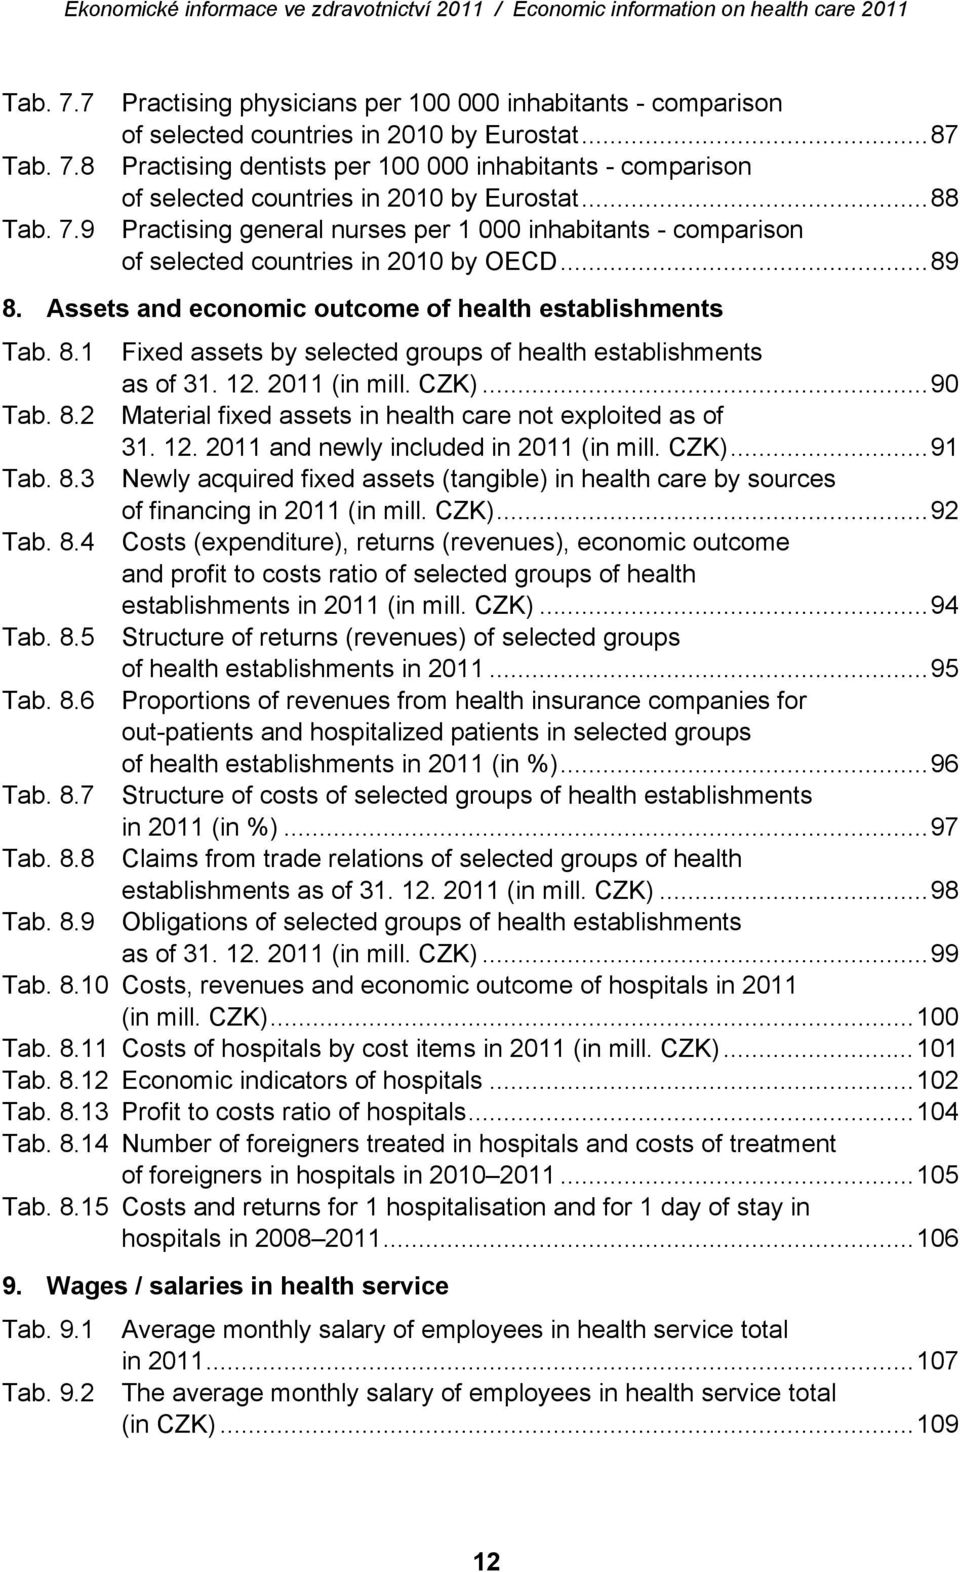 ..88 Practising general nurses per 1 000 inhabitants - comparison of selected countries in 2010 by OECD...89 8. Assets and economic outcome of health establishments Tab. 8.1 Fixed assets by selected groups of health establishments as of 31.